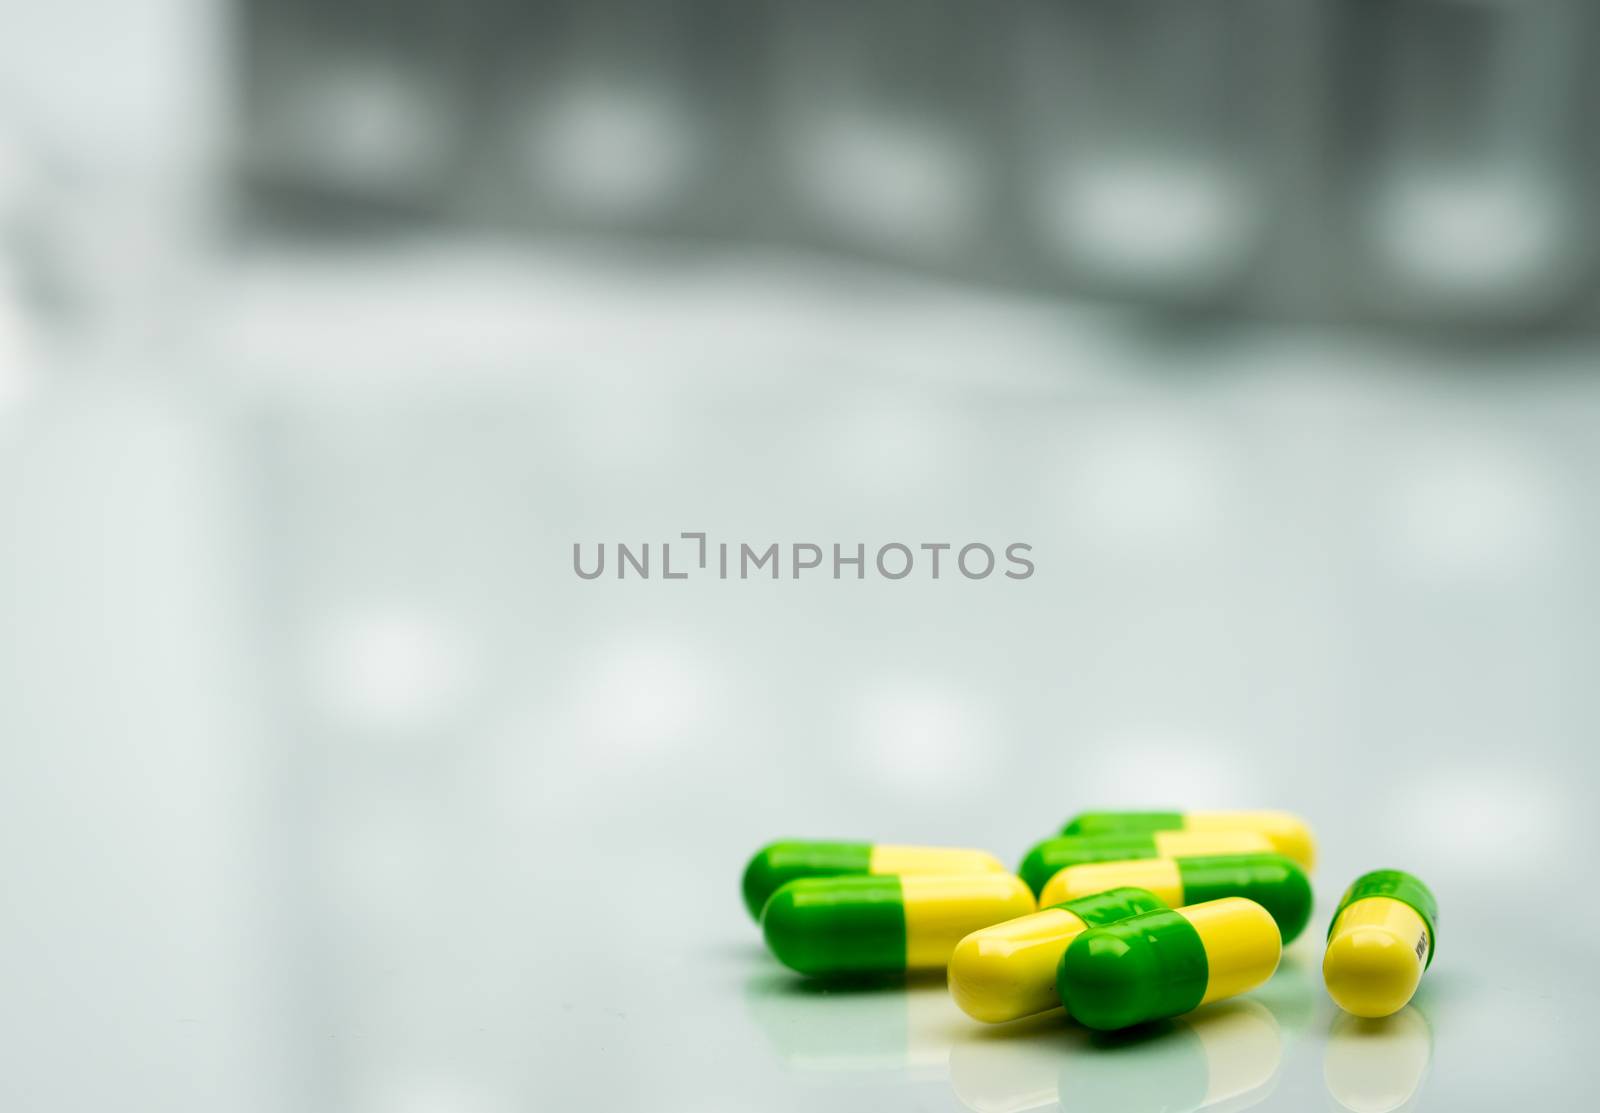 Green, yellow tramadol capsule pills on blurred silver blister pack background with copy space. Cancer pain management. Opioid analgesics. Drug abuse in teenage. Pharmaceutical industry. Pharmacy background. Global healthcare concept.